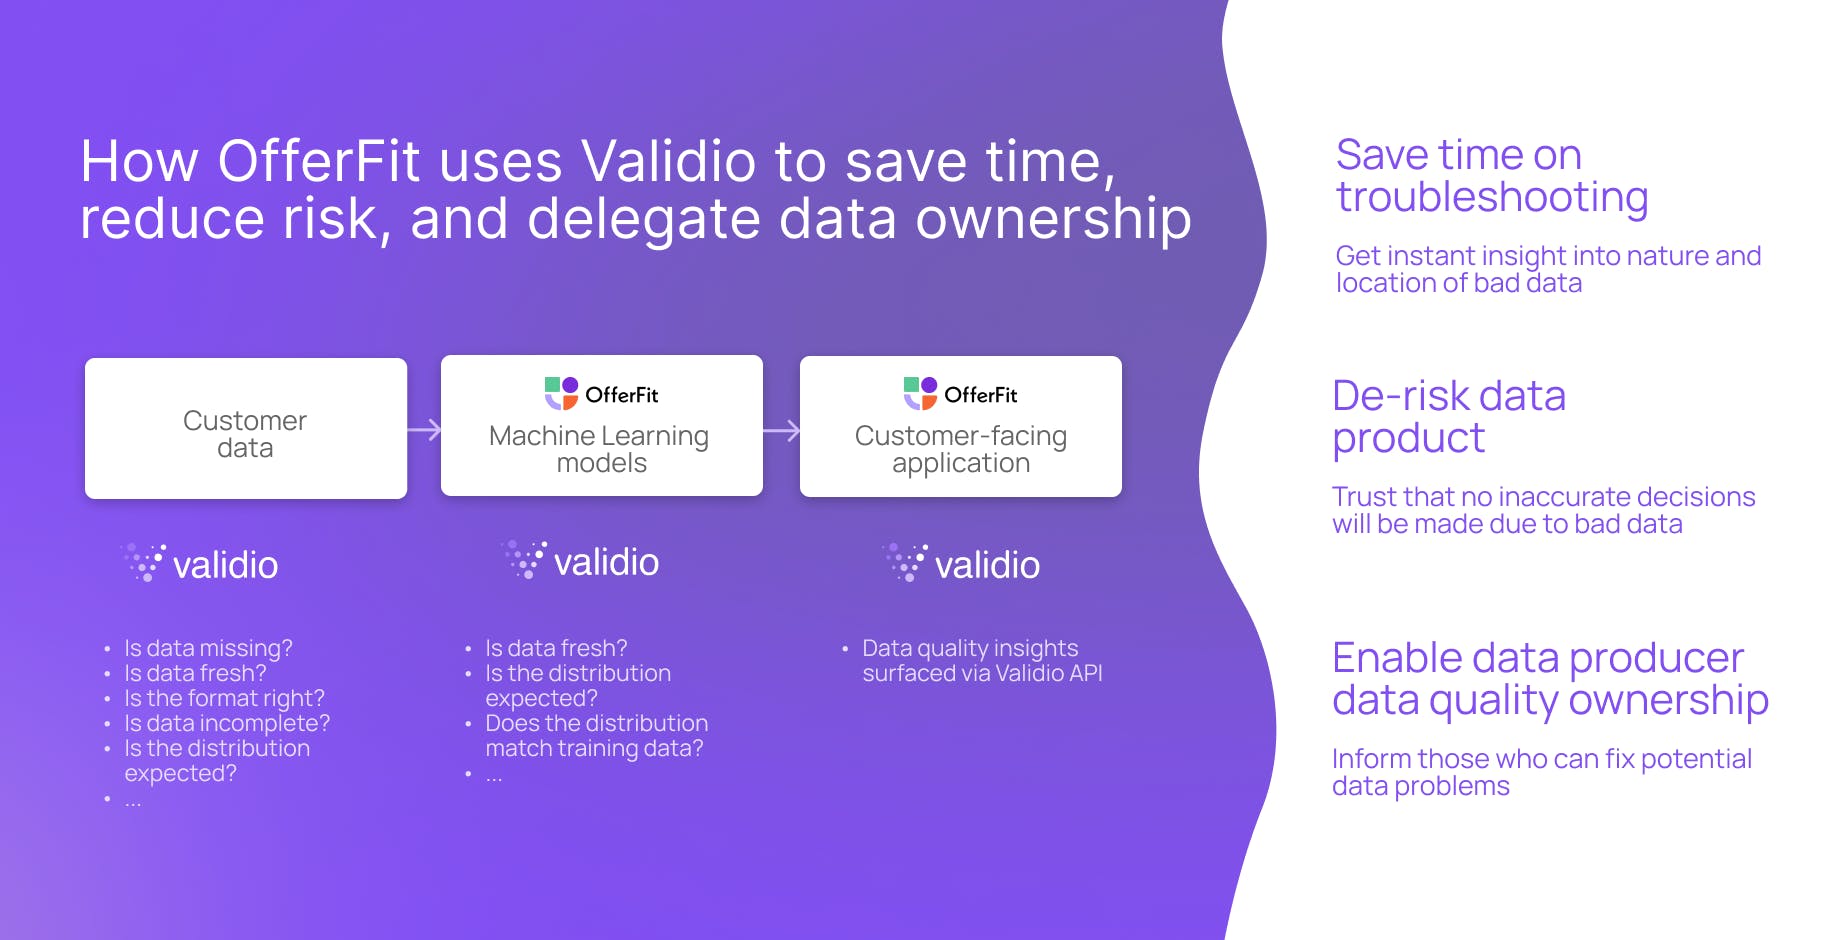 Validio helps OfferFit save time, reduce risk, and enable data producer data quality ownership.